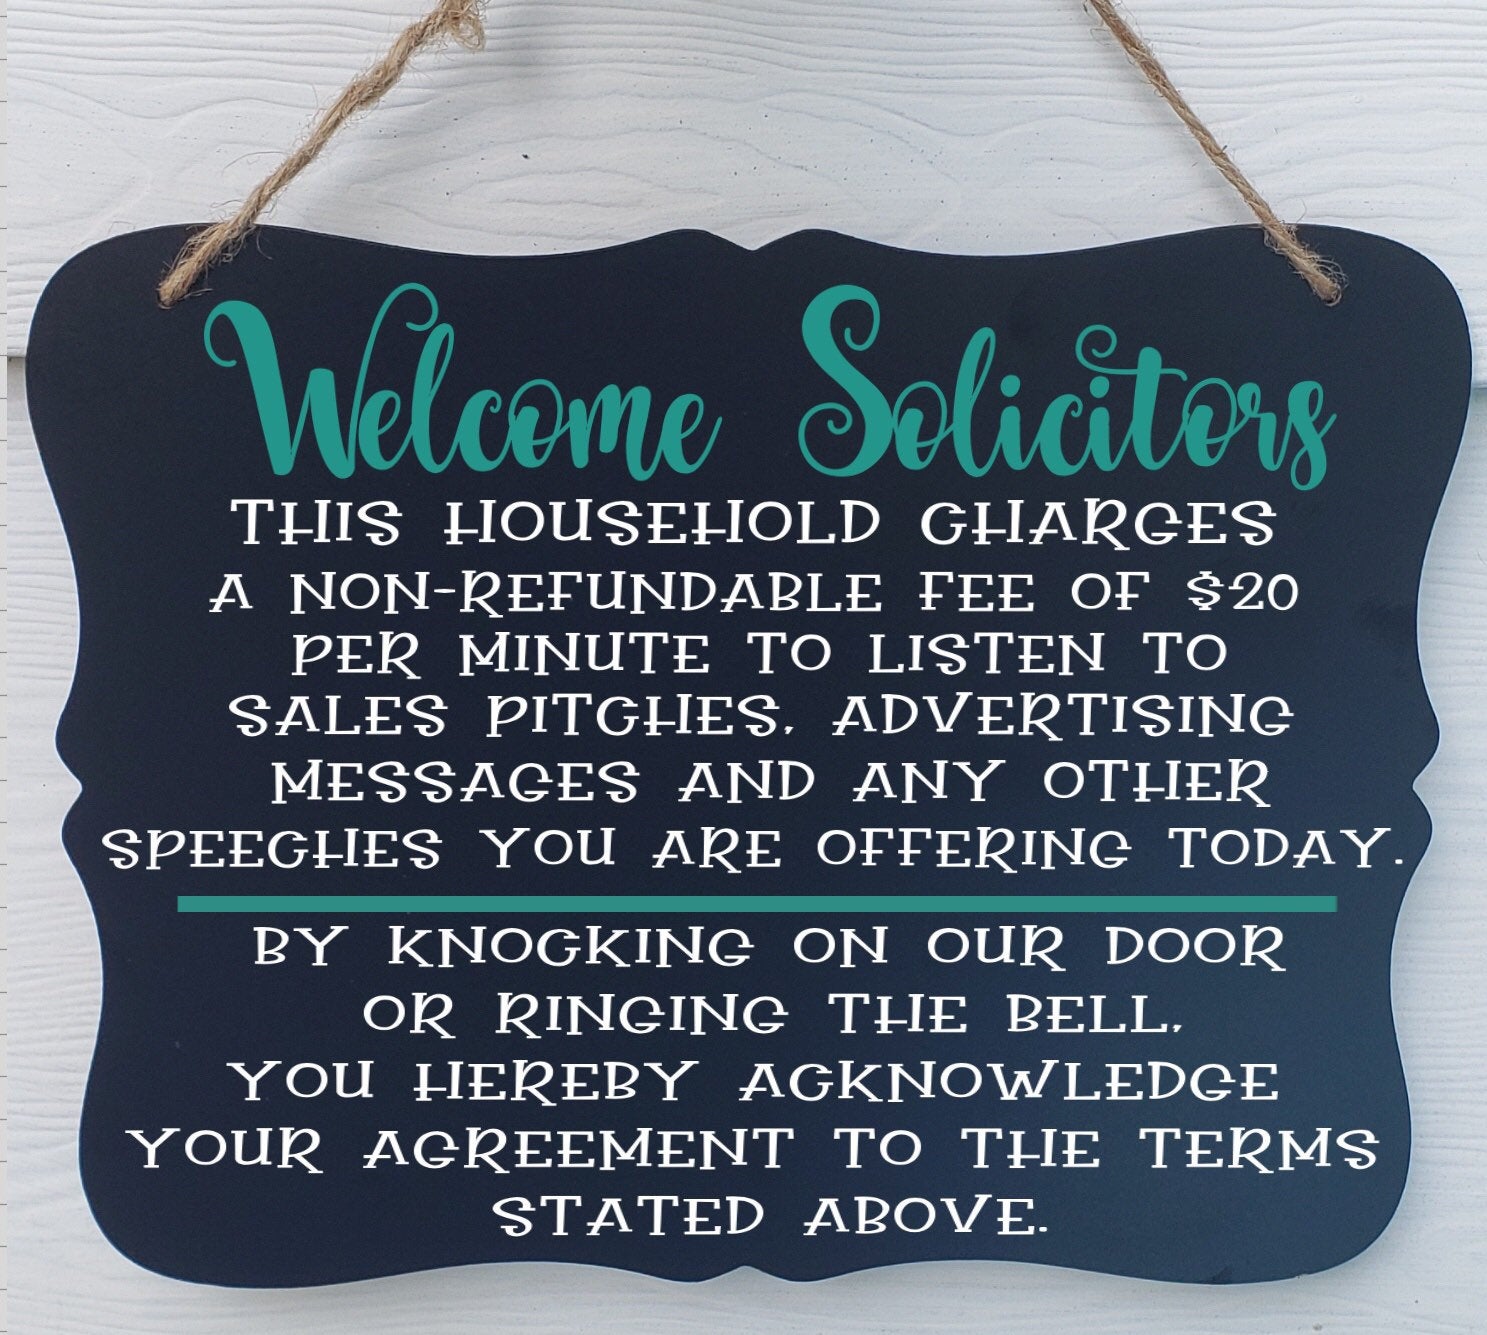 Welcome Solicitors - Best Funny No Soliciting Signs